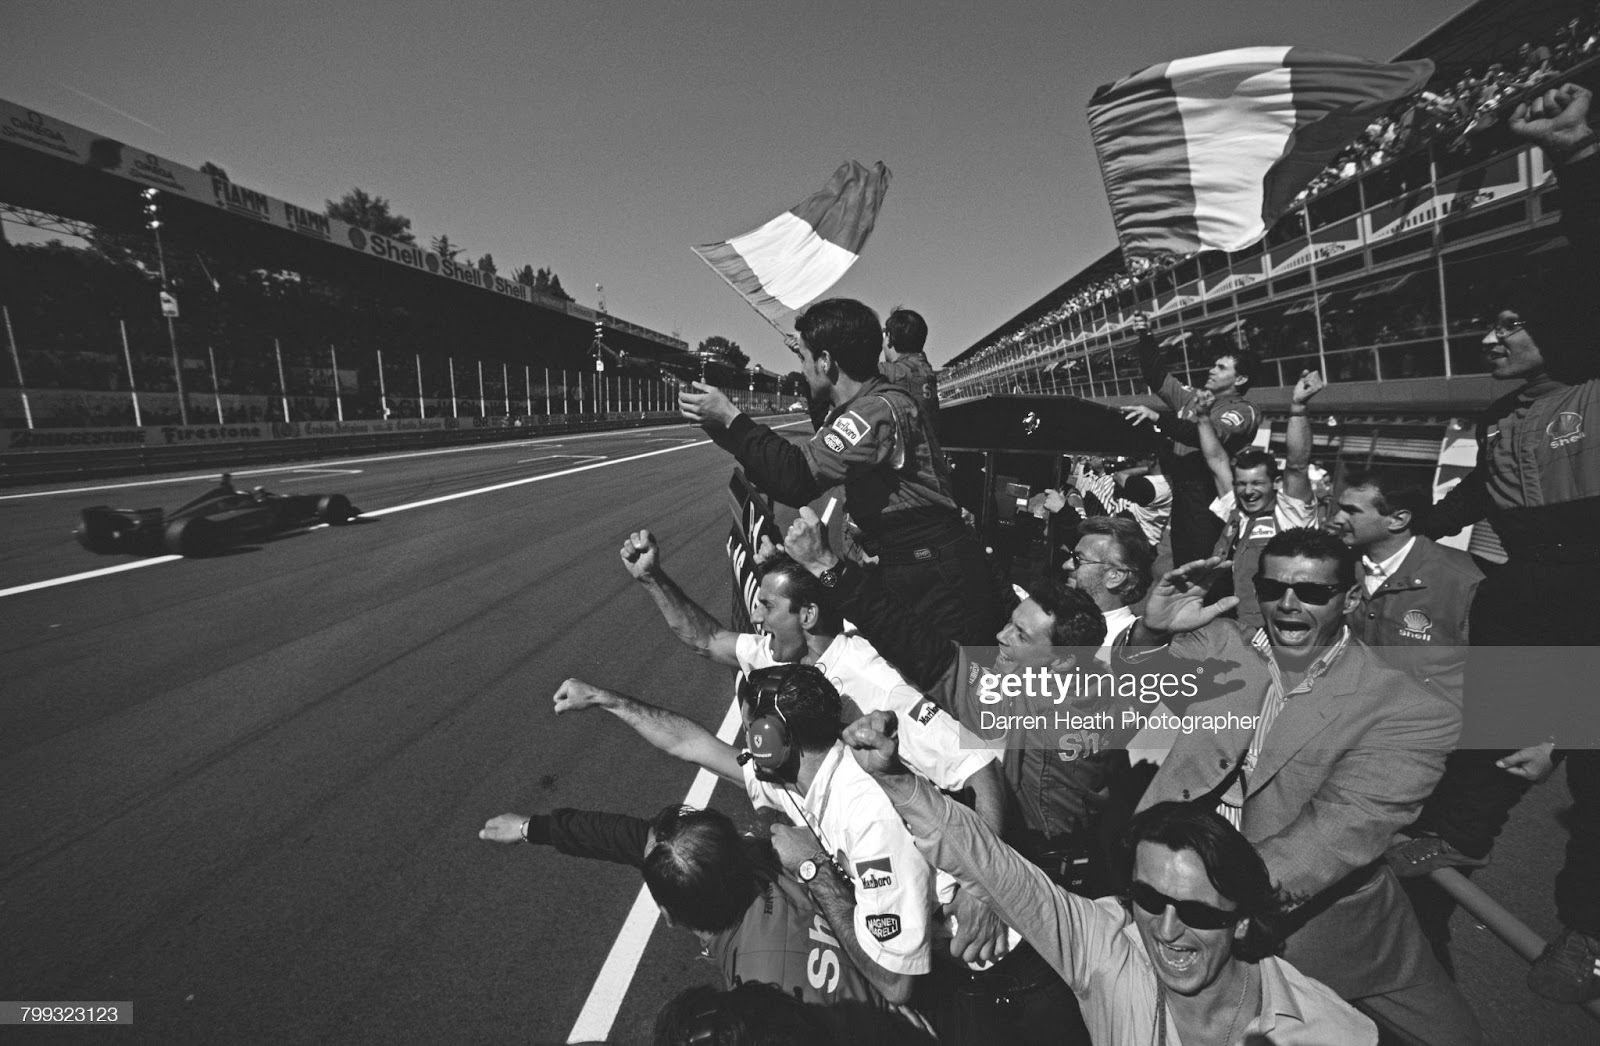 Scuderia Ferrari team members salute Michael Schumacher from the pit lane wall as he takes the chequered flag driving the n.1 Ferrari F310 V10 to win the F1 Italian Grand Prix on 8 September 1996 at the Autodromo Nazionale Monza. 